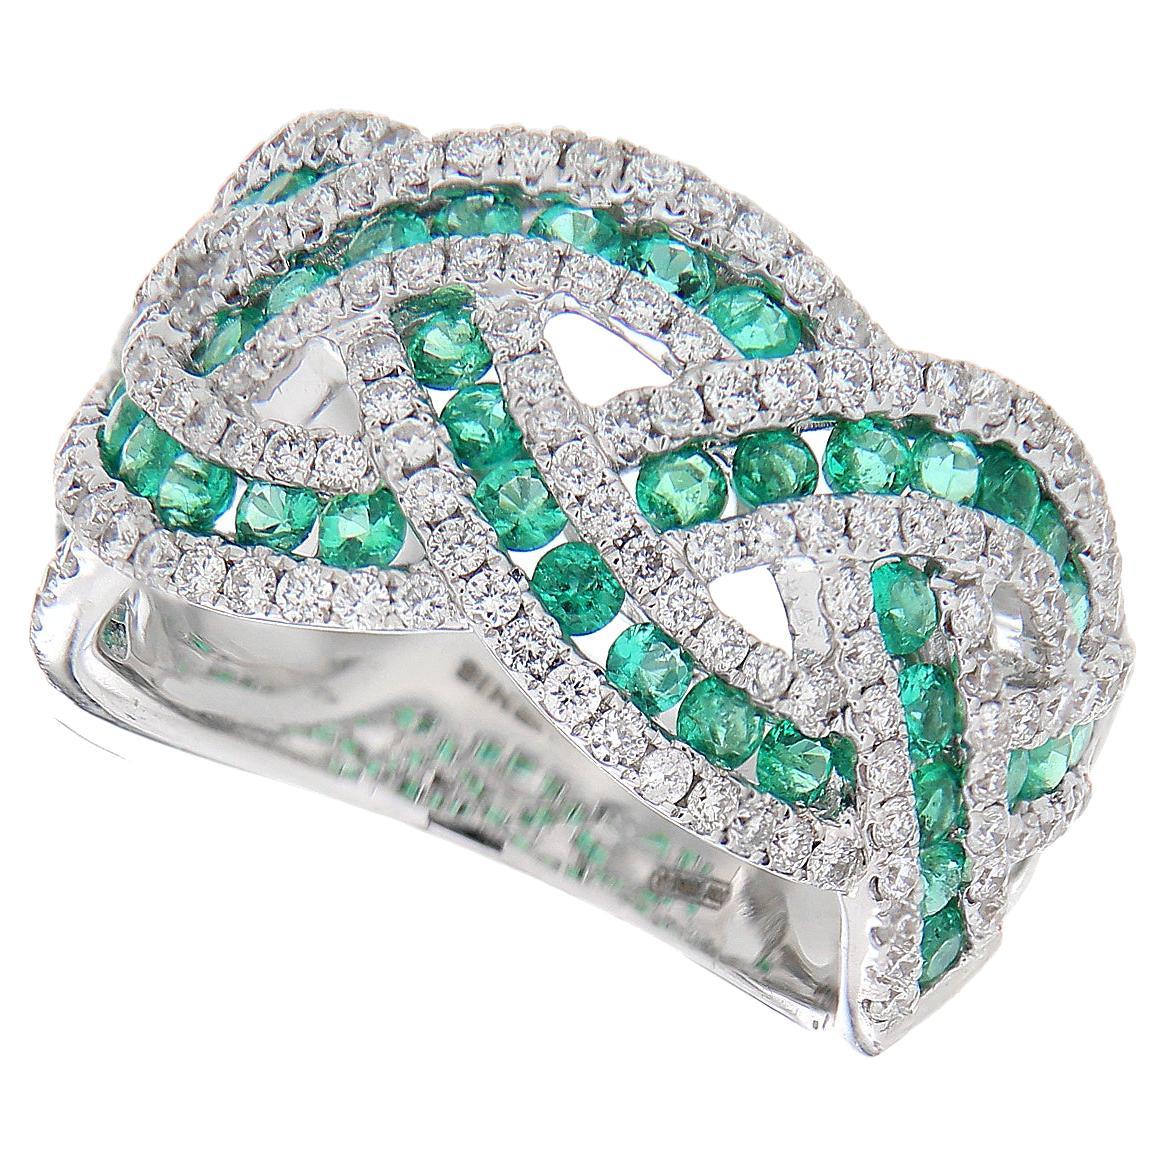 18Kt White Gold Band Ring White Diamonds 1.08 ct Emeralds 1.85 ct For Sale